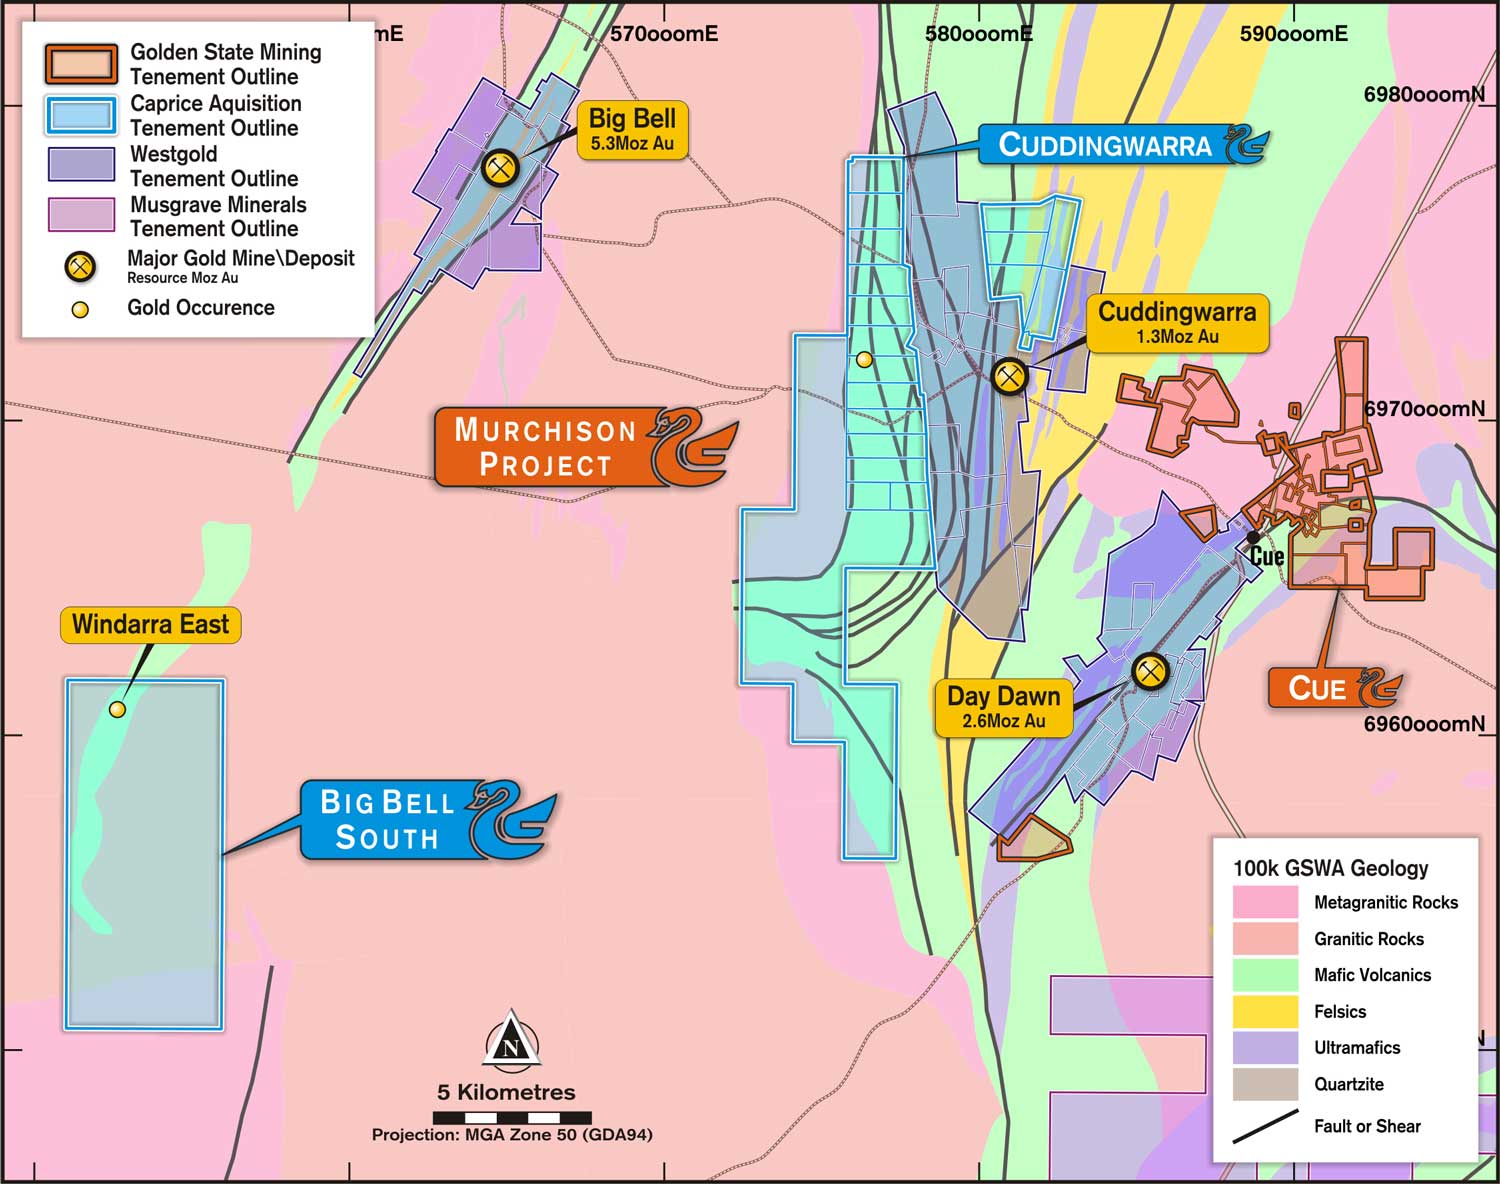 Caprice Resources transaction tenements near Cue in the Murchison